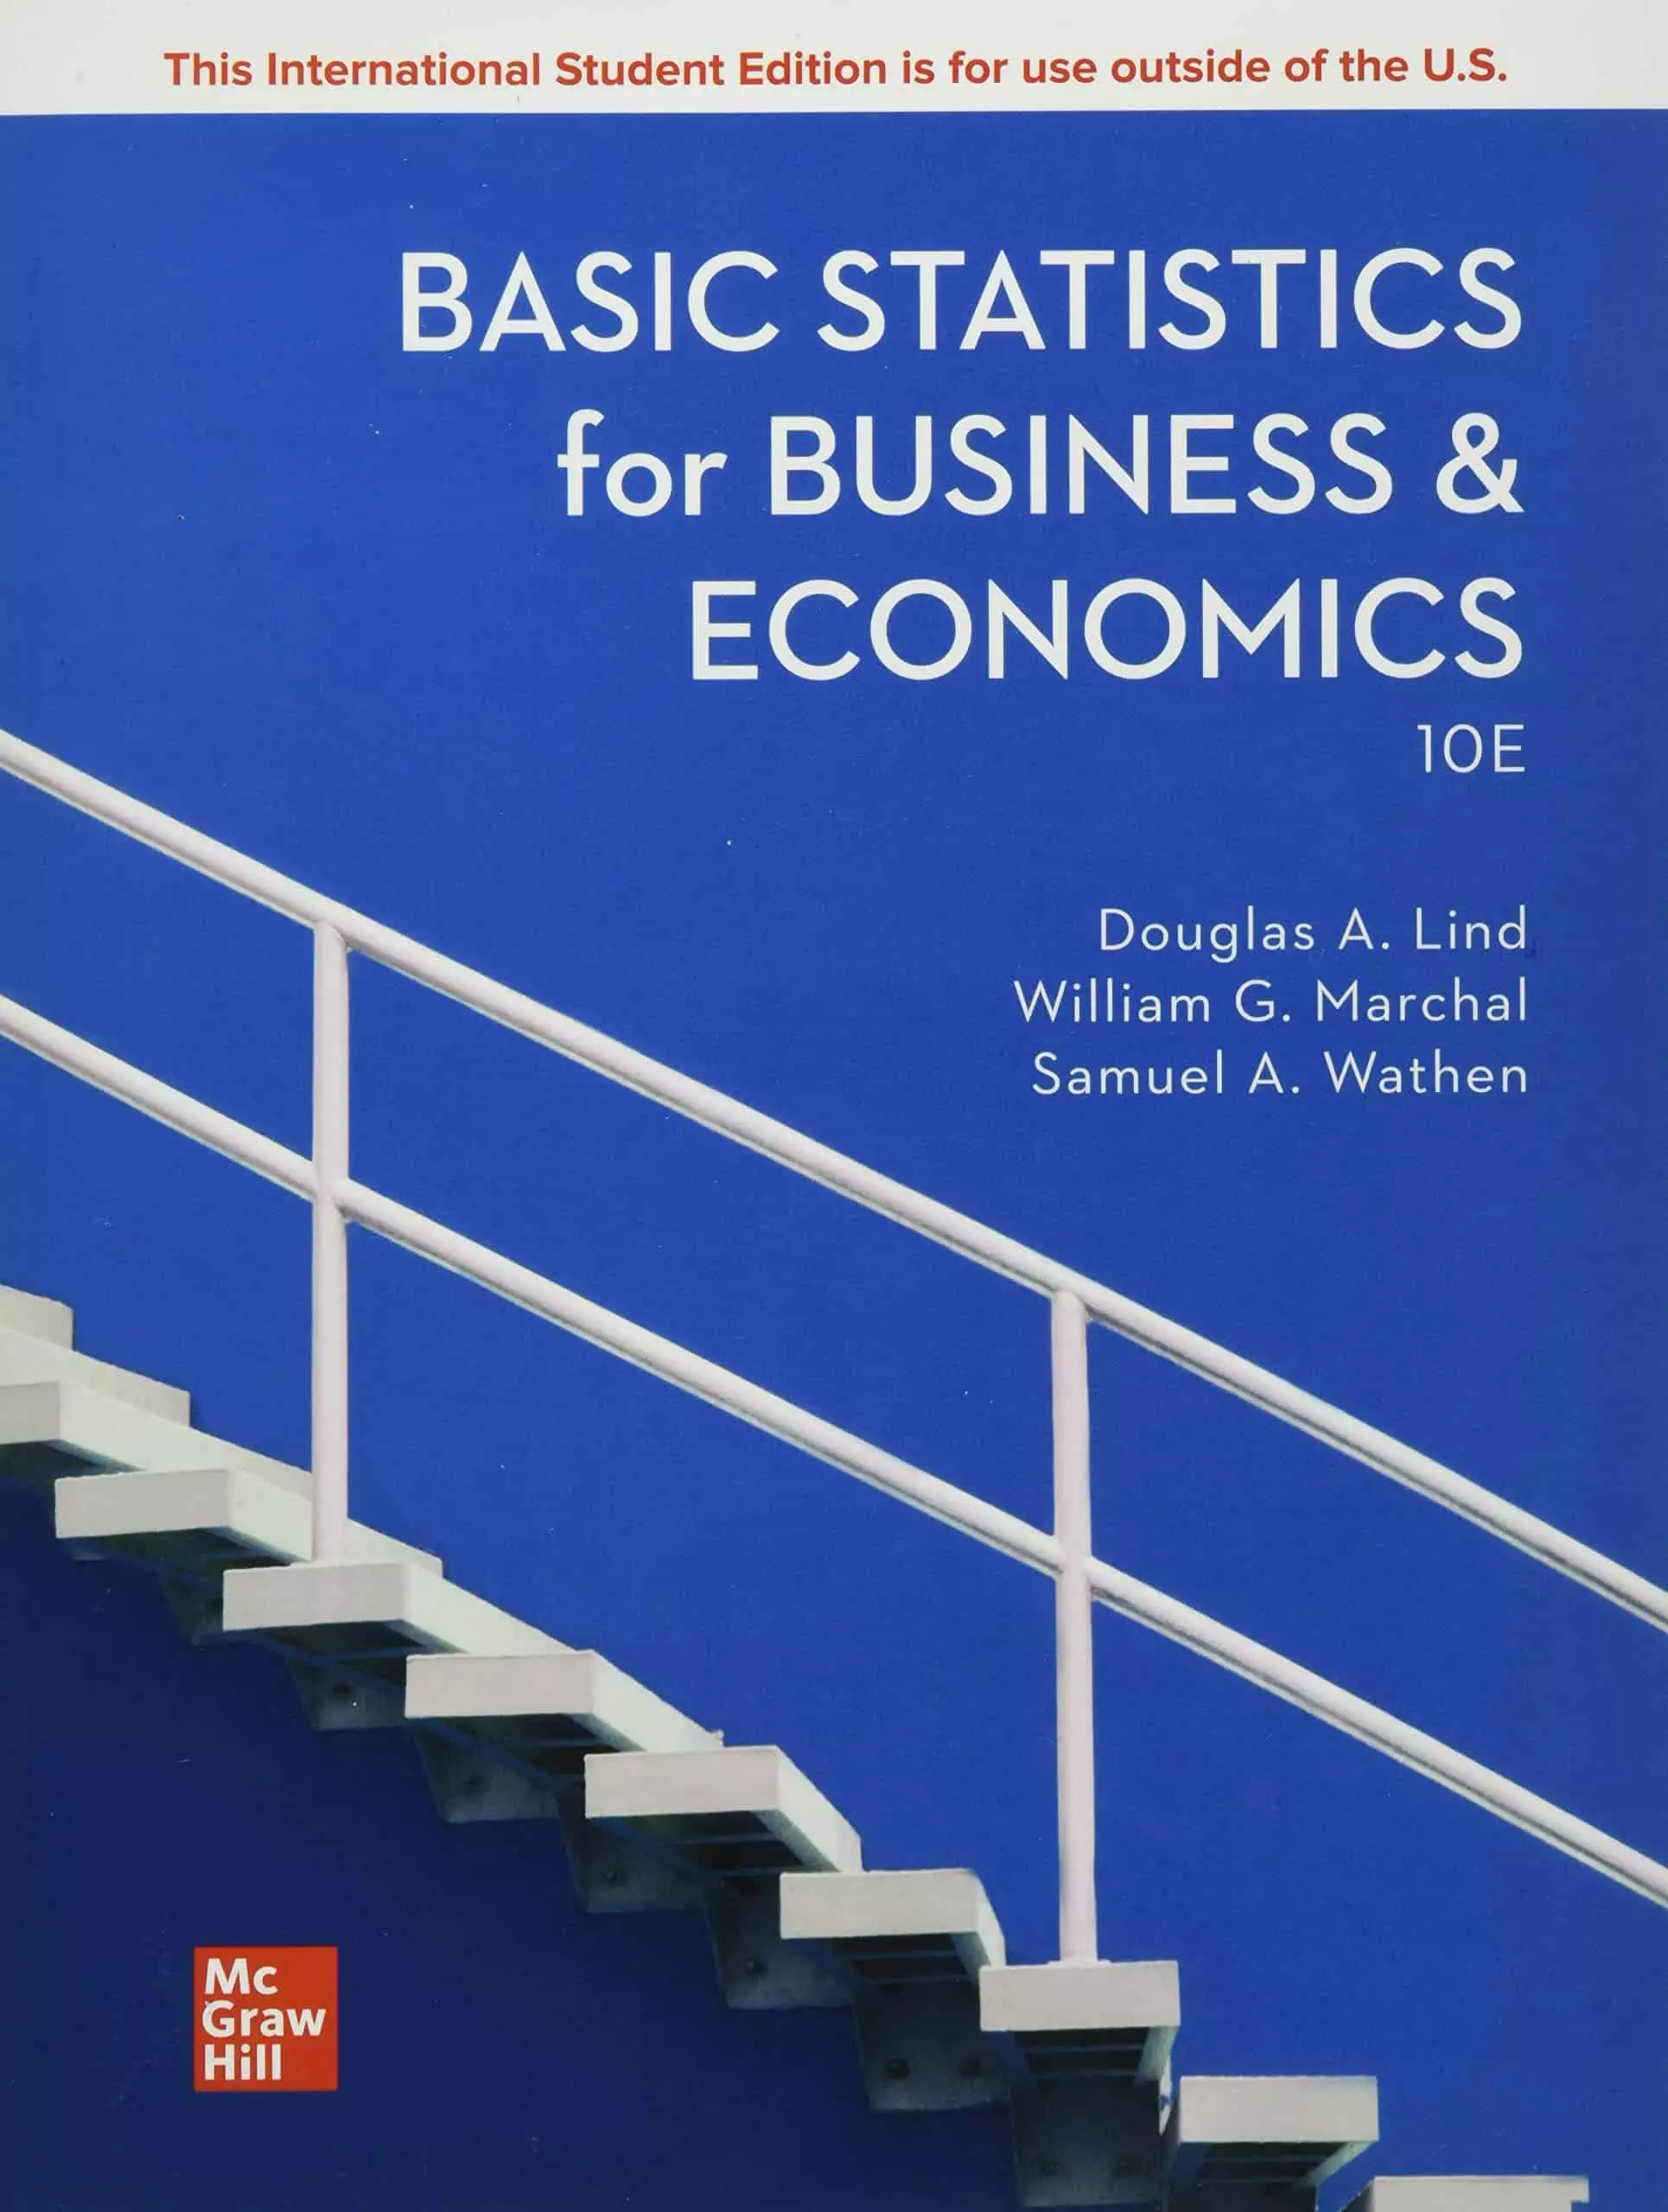 Basic Statistics in Business and Economics (ISE HED IRWIN STATISTICS) 10th Edition